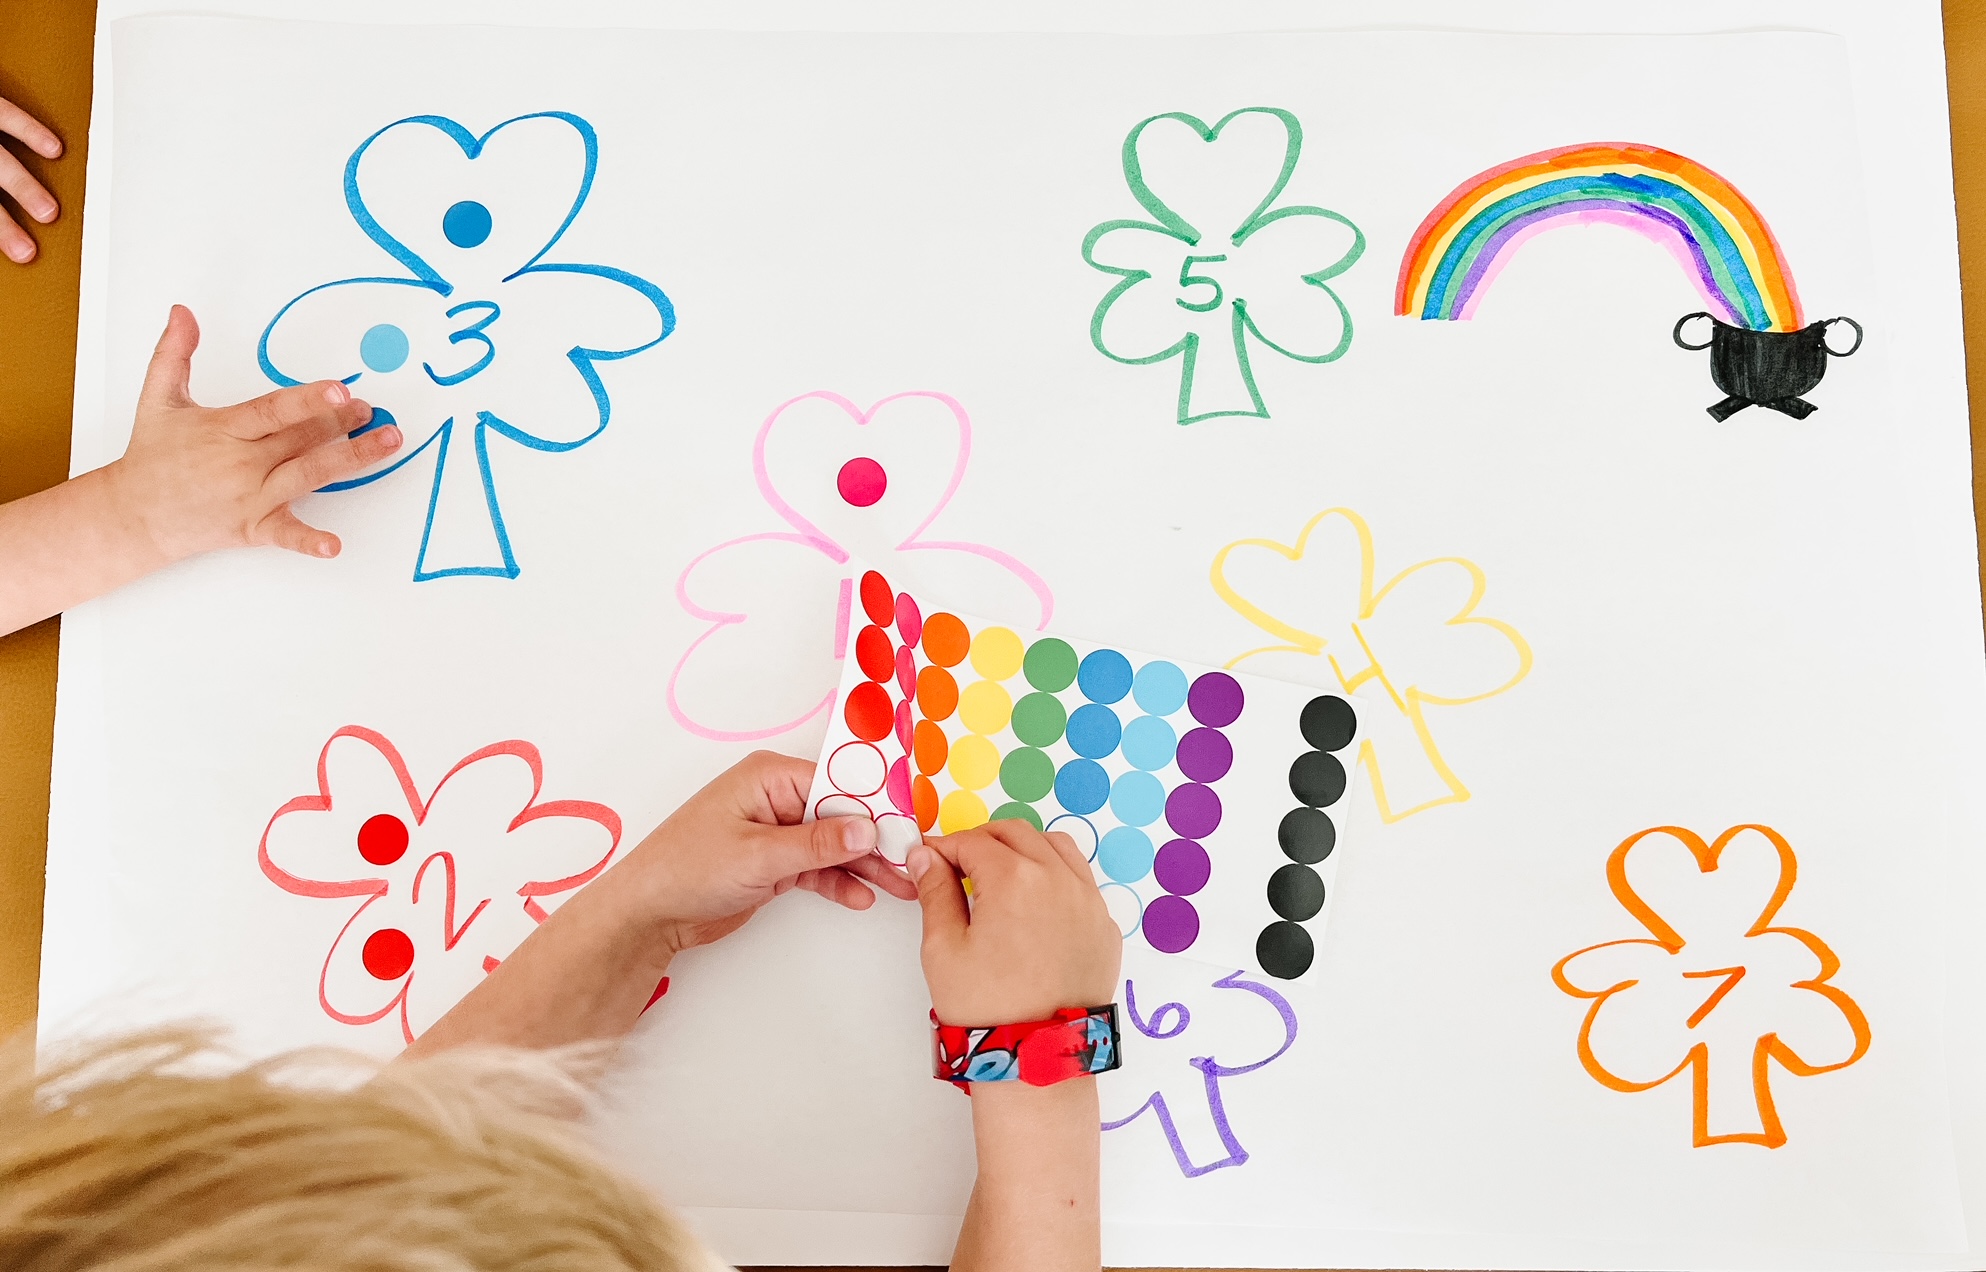 One page of sticker dots, endless fun! These 5 learning activities